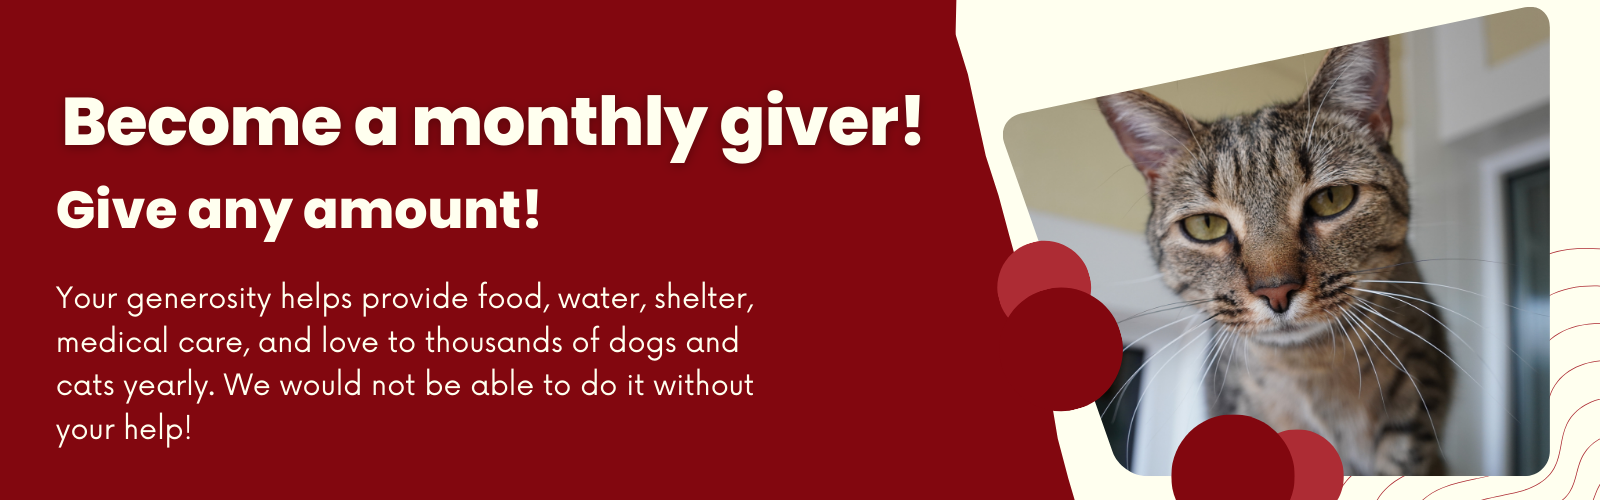 Become a Monthly Giver